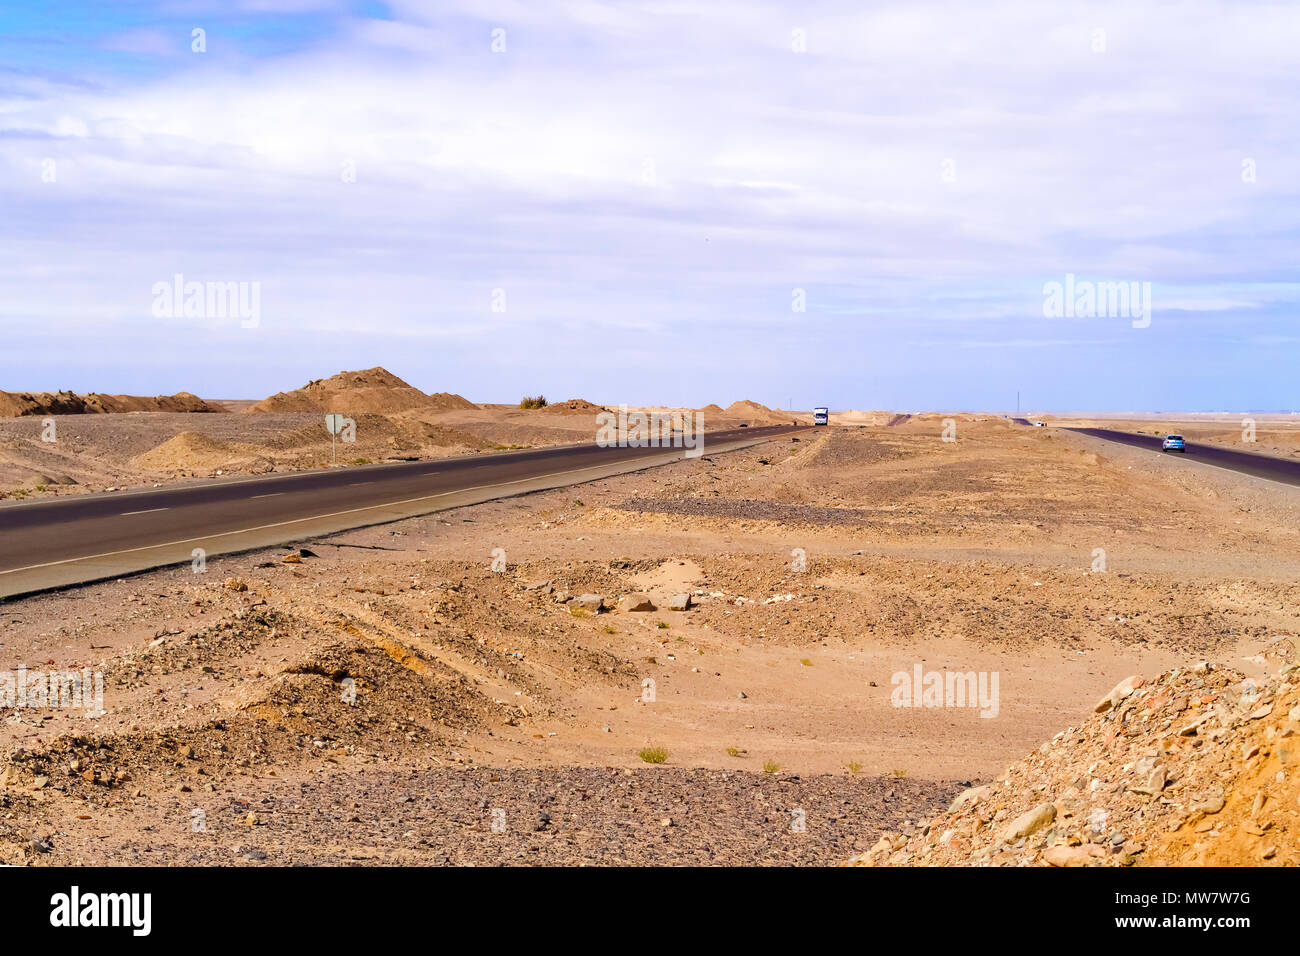 Picturesque landscape of the Eastern desert in Egypt Stock Photo